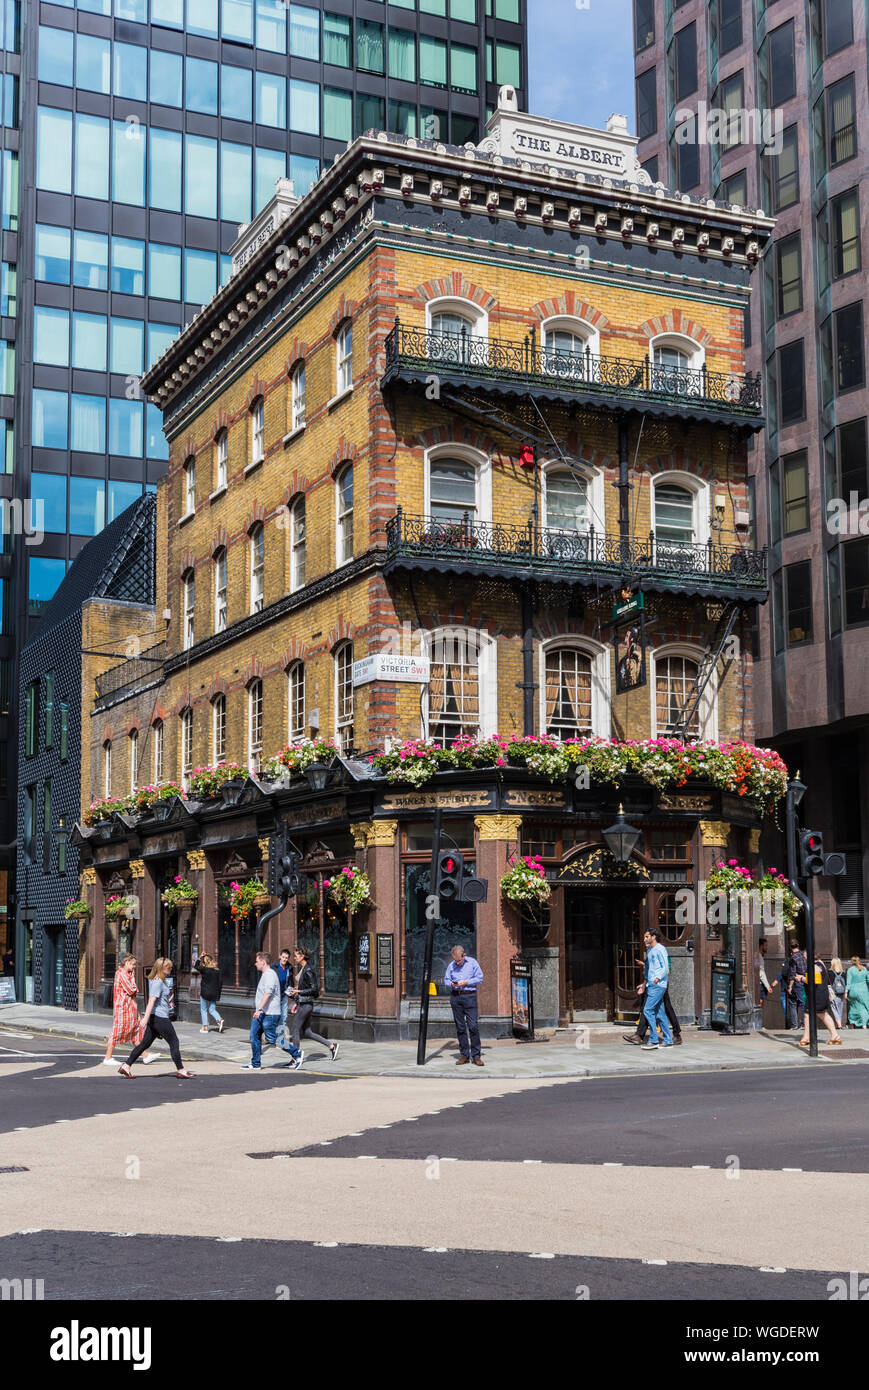 The Albert pub (public house) in Victoria Street, City of Westminster, Central London, England, UK. London pubs. Stock Photo